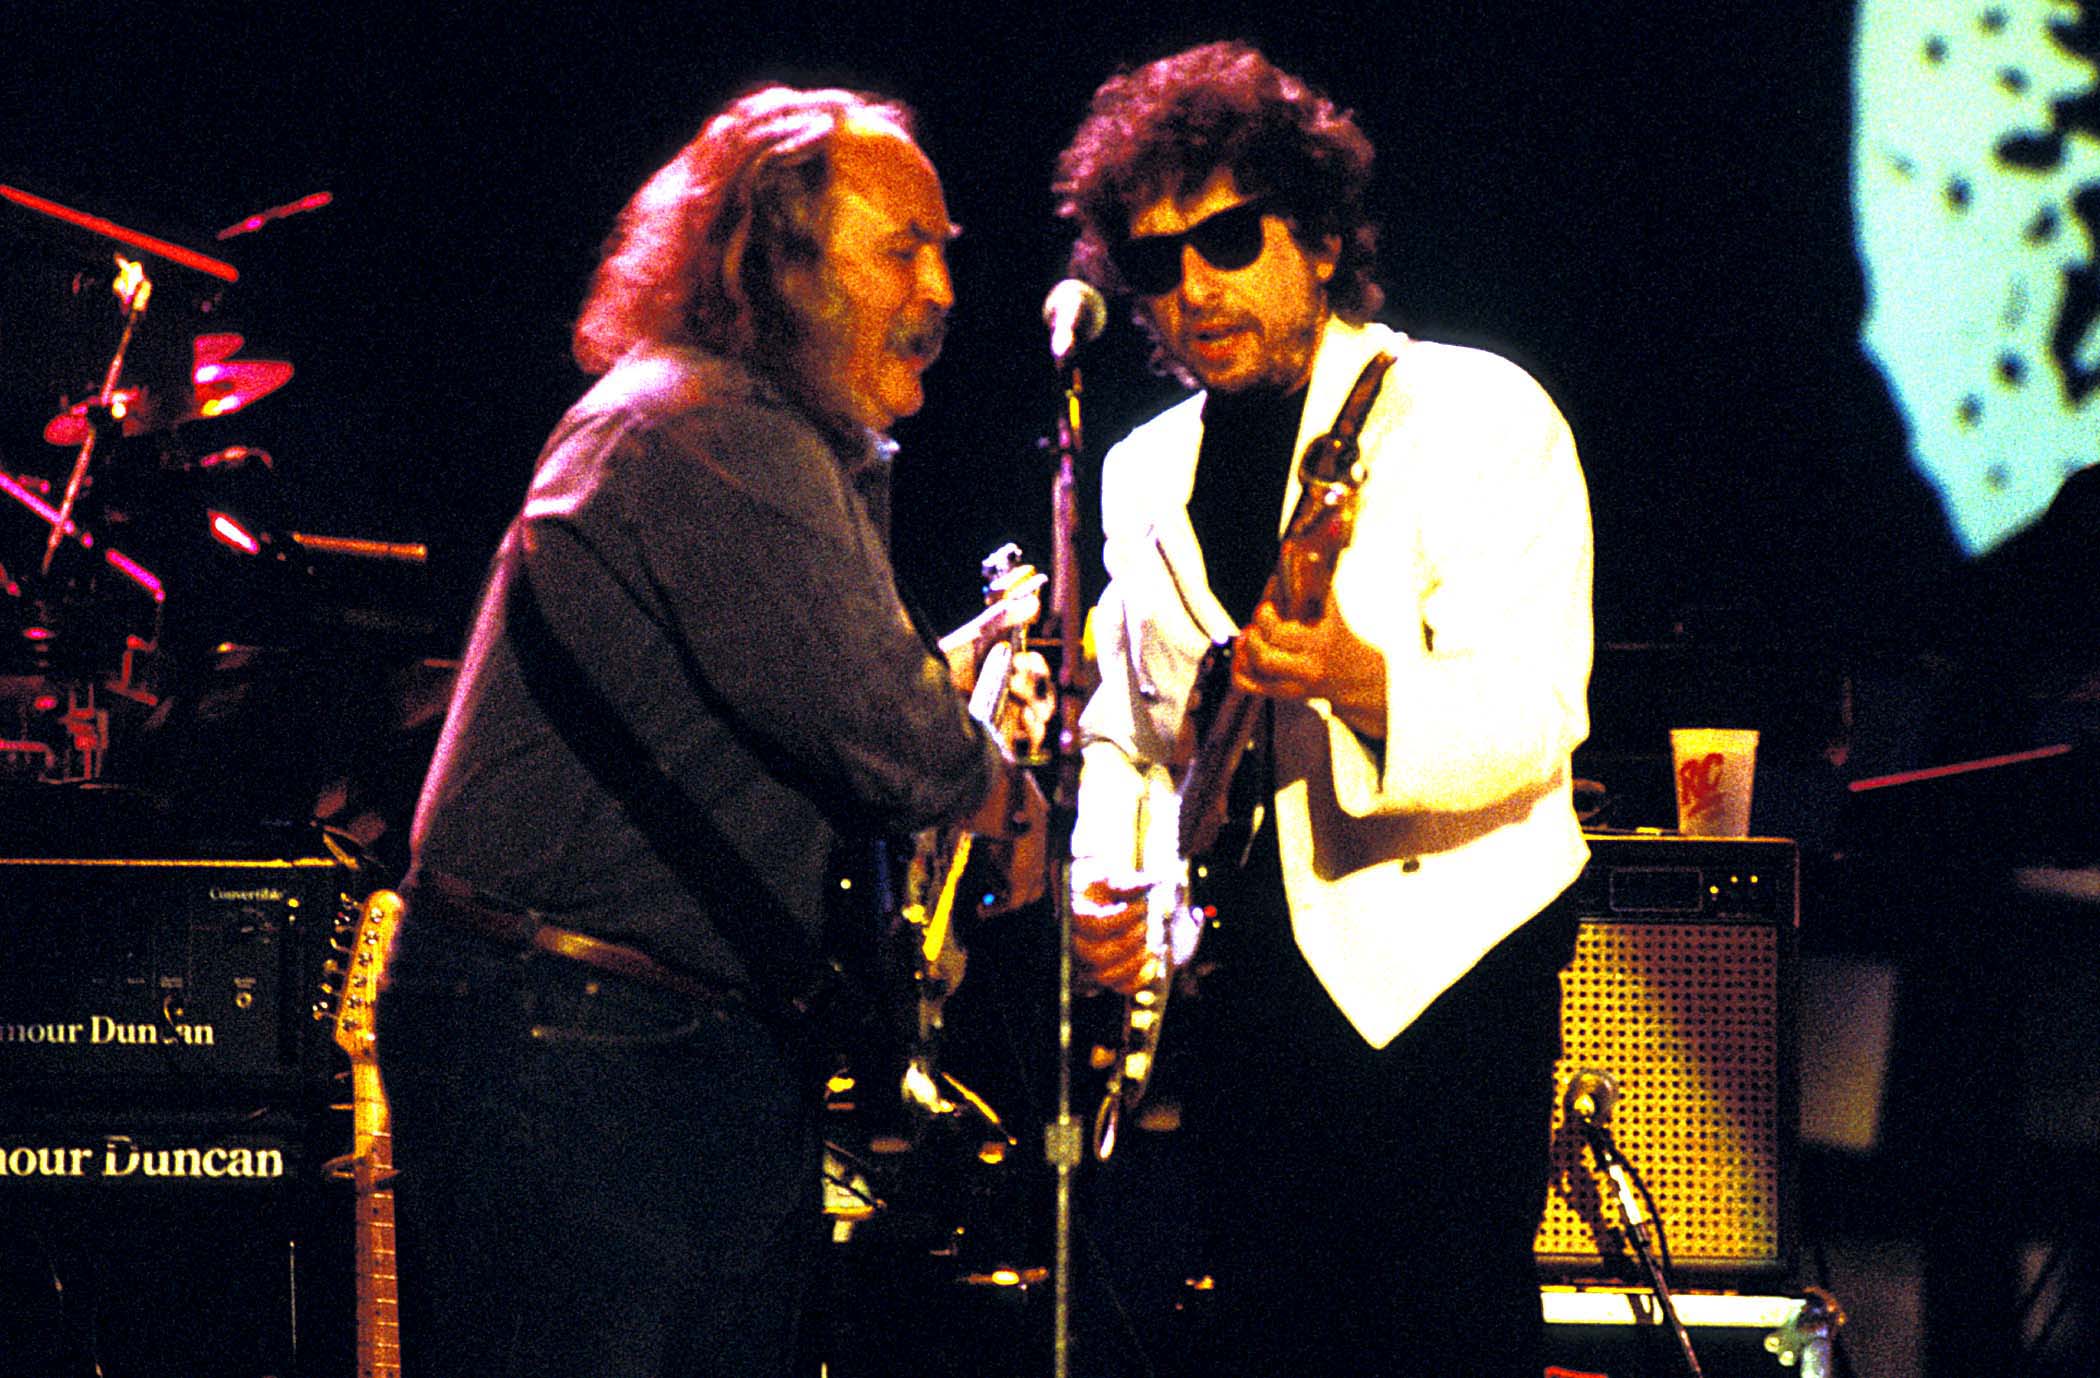 David Crosby and Bob Dylan play guitars and sing into the same microphone.